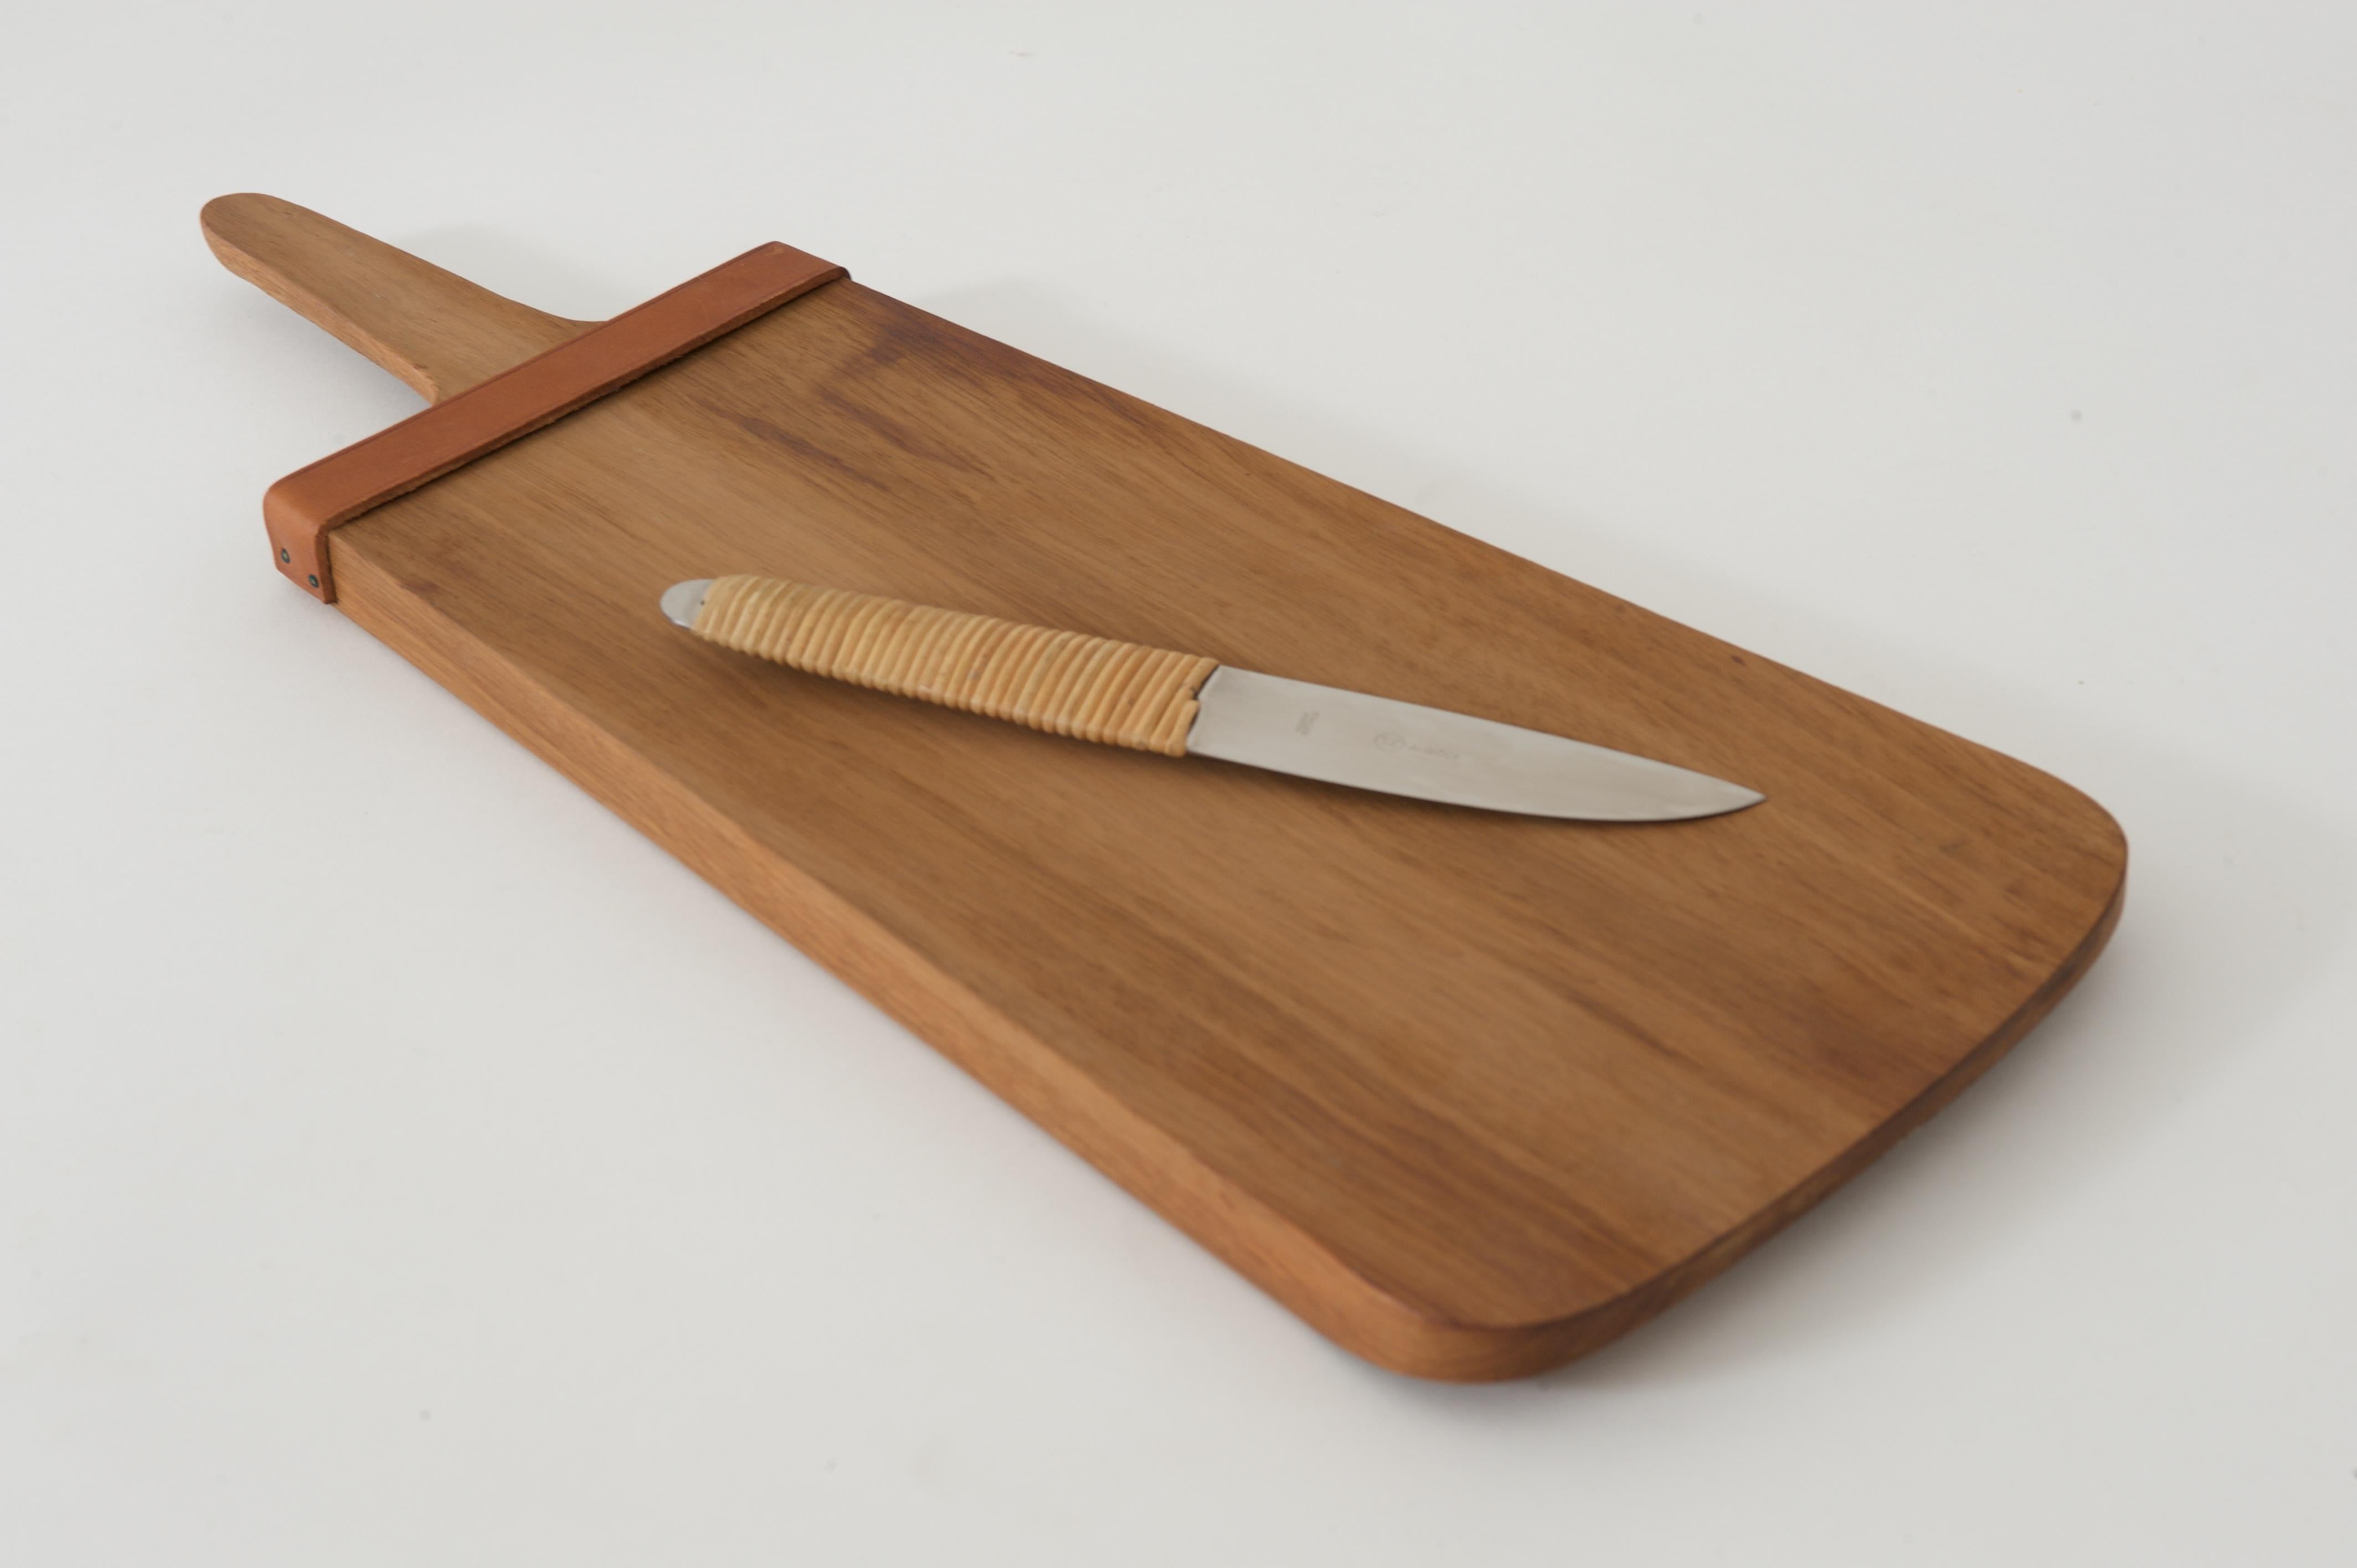 Modern Chopping Board with a Knife by Carl Auböck